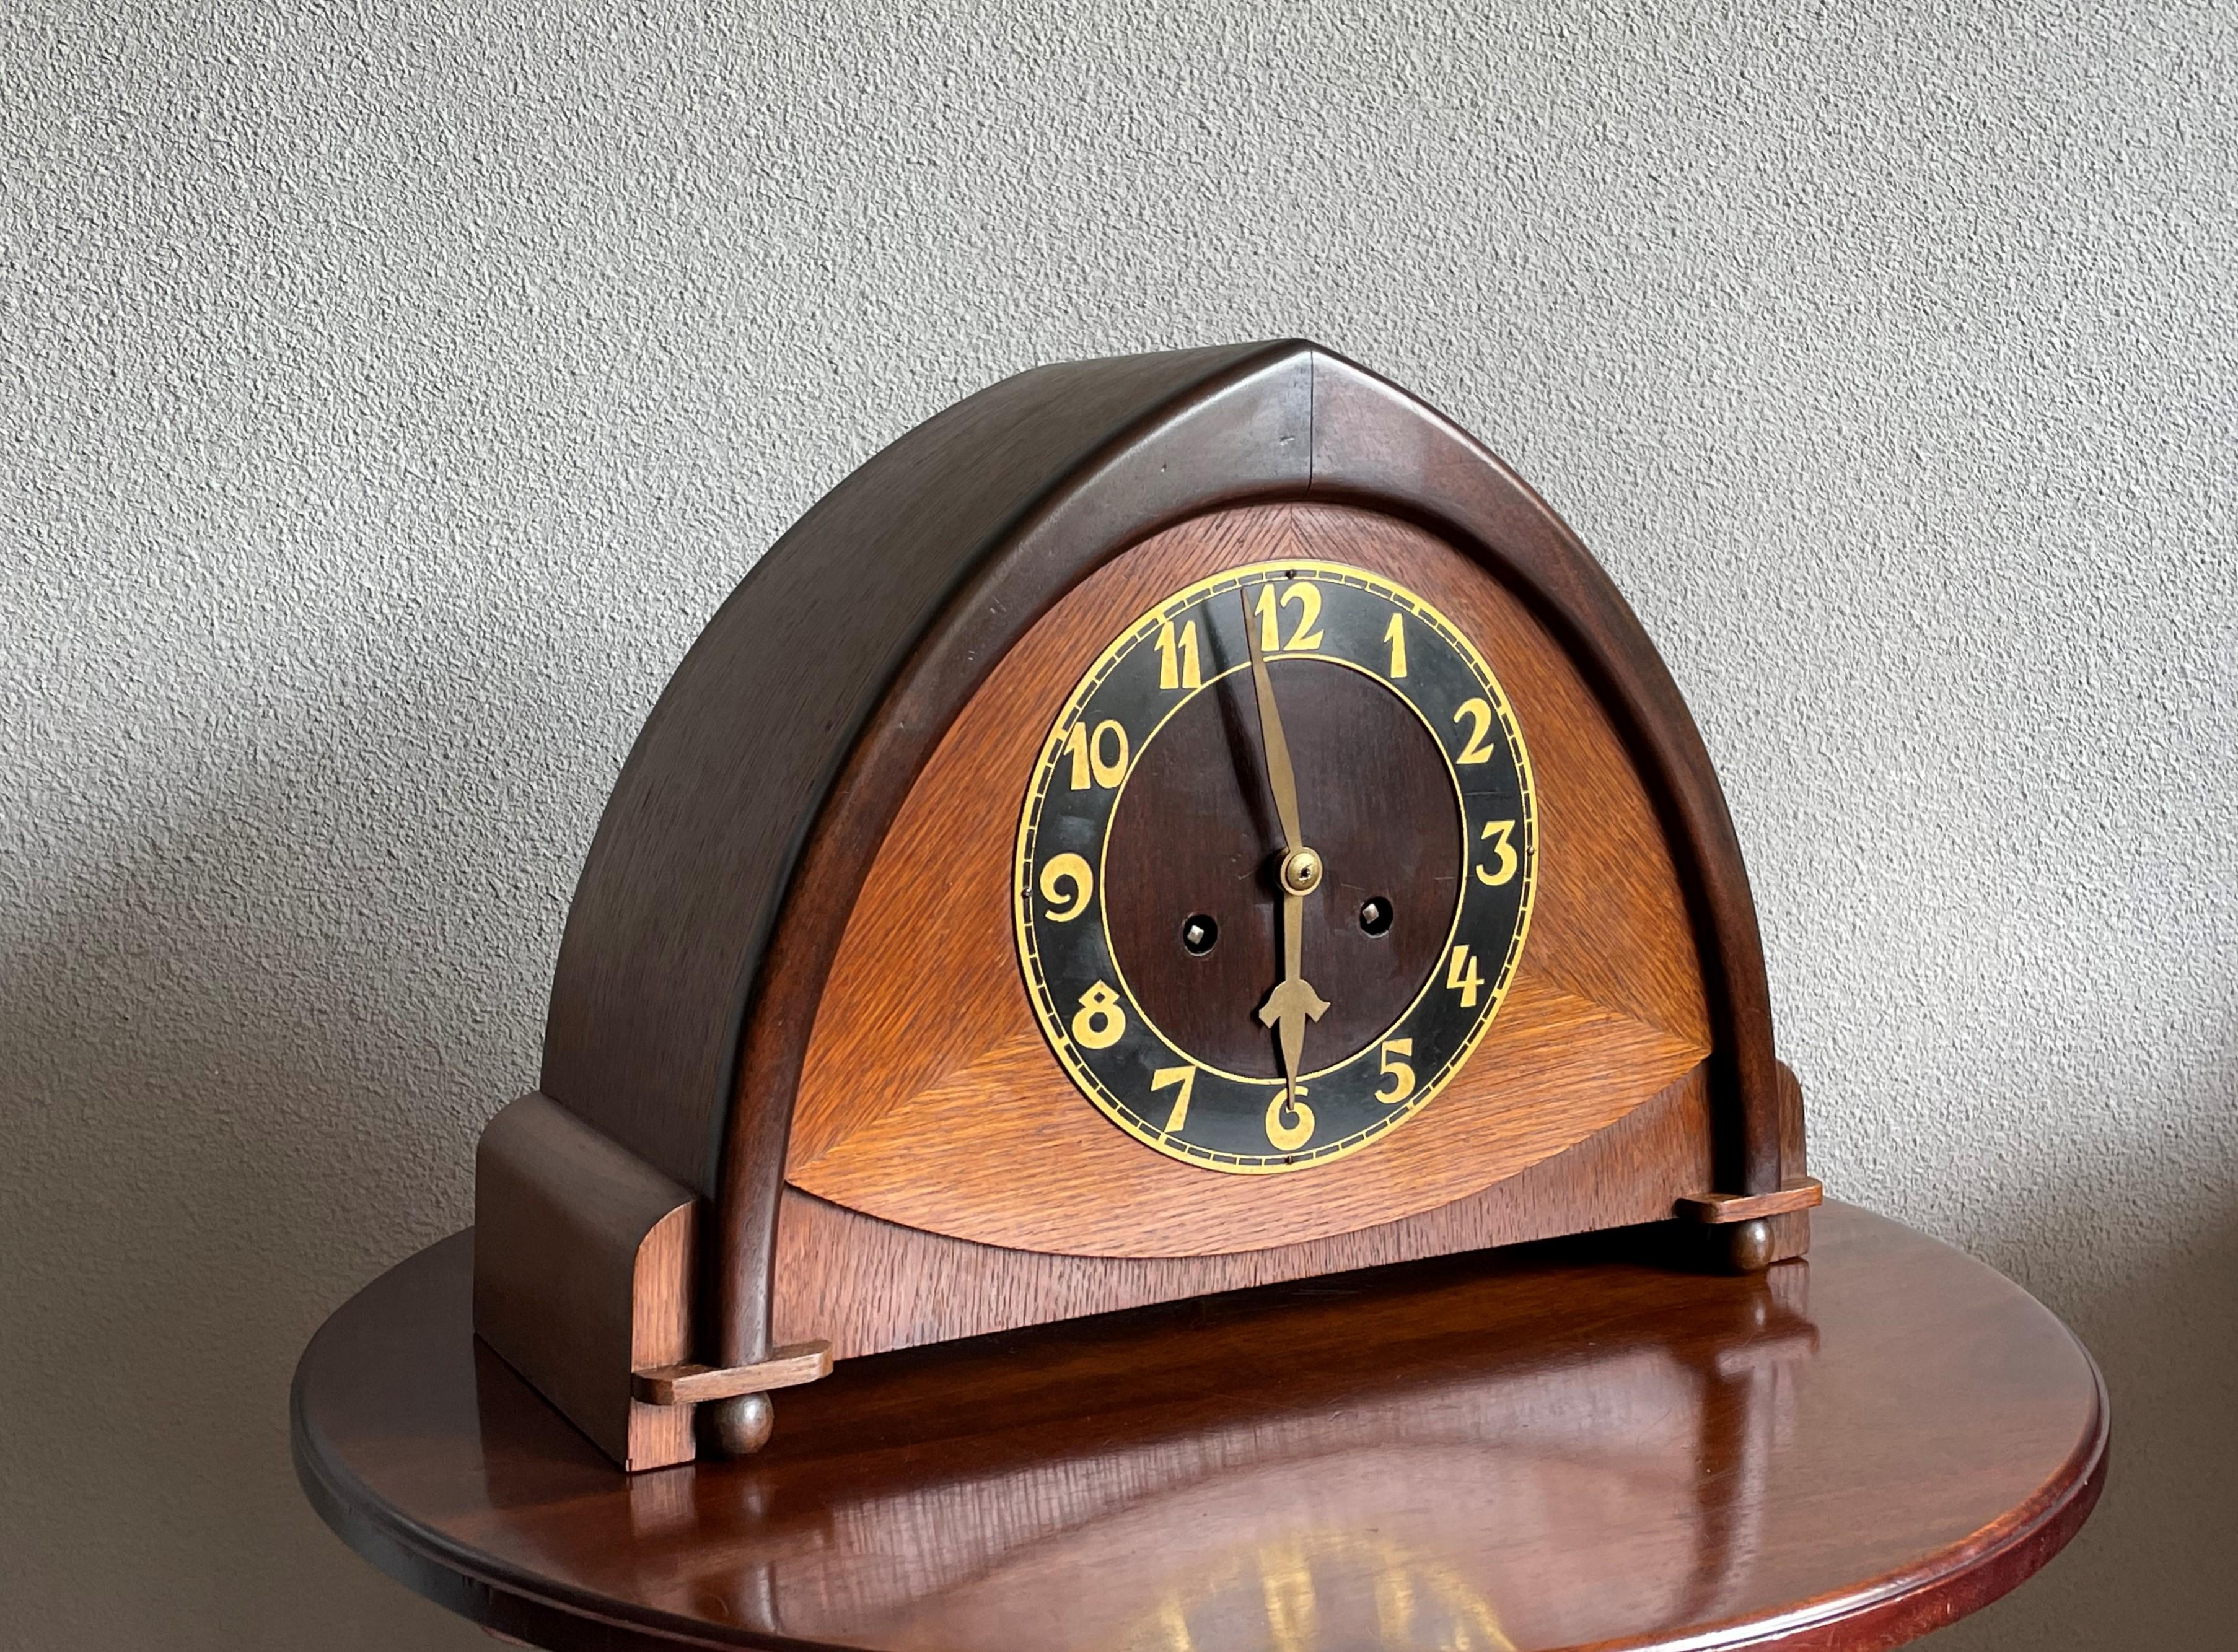 Dutch Arts & Crafts Wooden Mantle or Desk Clock w. Stunning Brass Dial Face 1915 For Sale 2